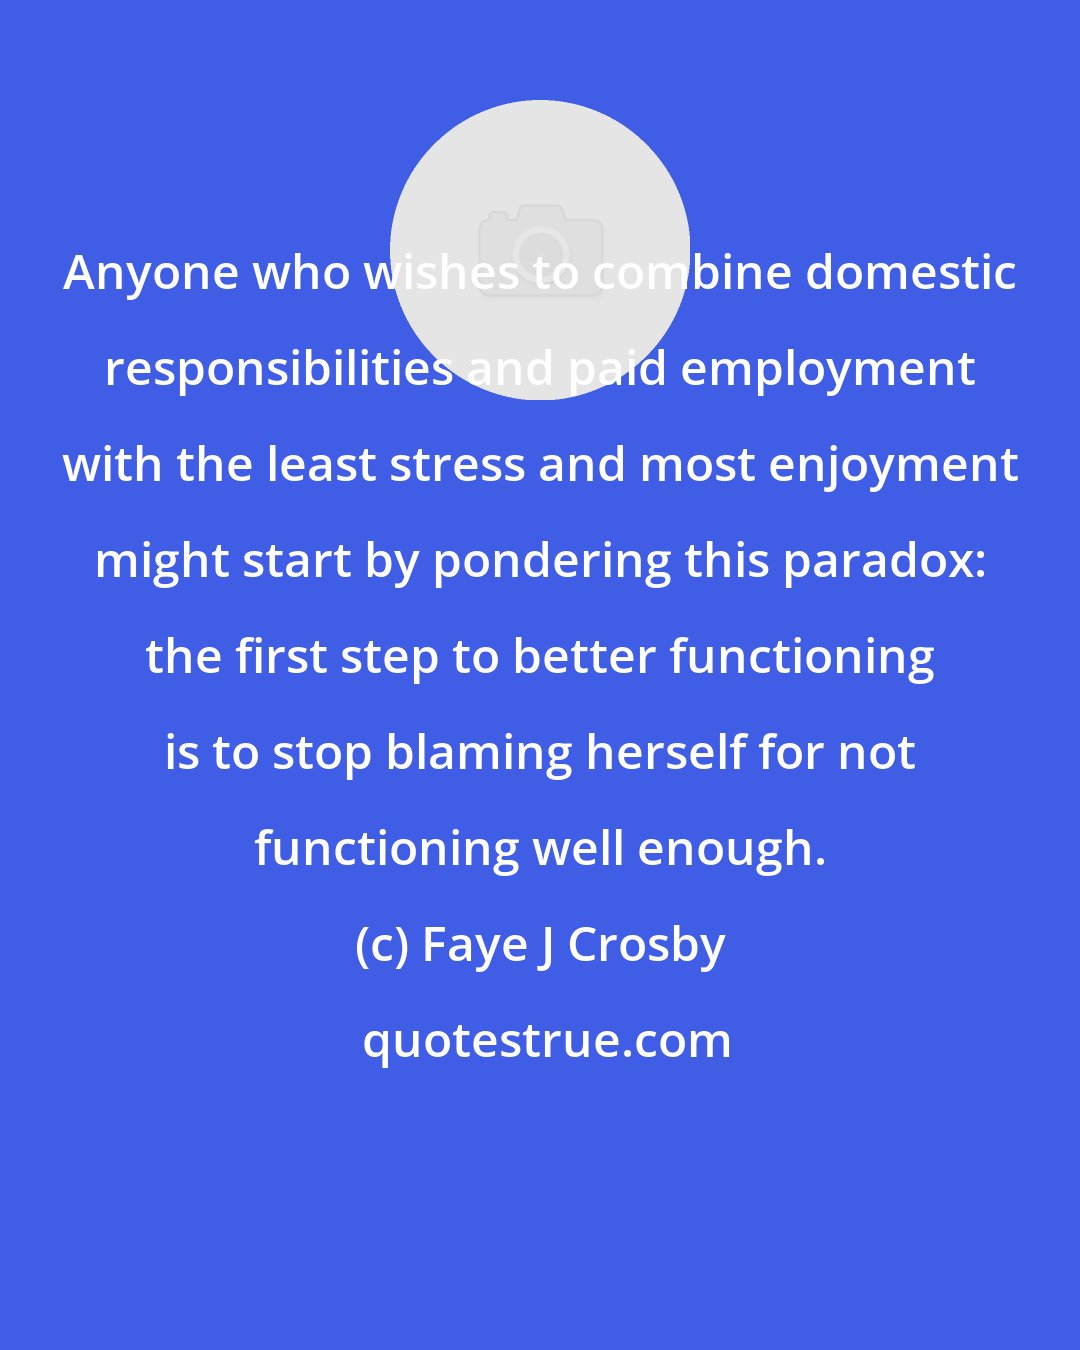 Faye J Crosby: Anyone who wishes to combine domestic responsibilities and paid employment with the least stress and most enjoyment might start by pondering this paradox: the first step to better functioning is to stop blaming herself for not functioning well enough.